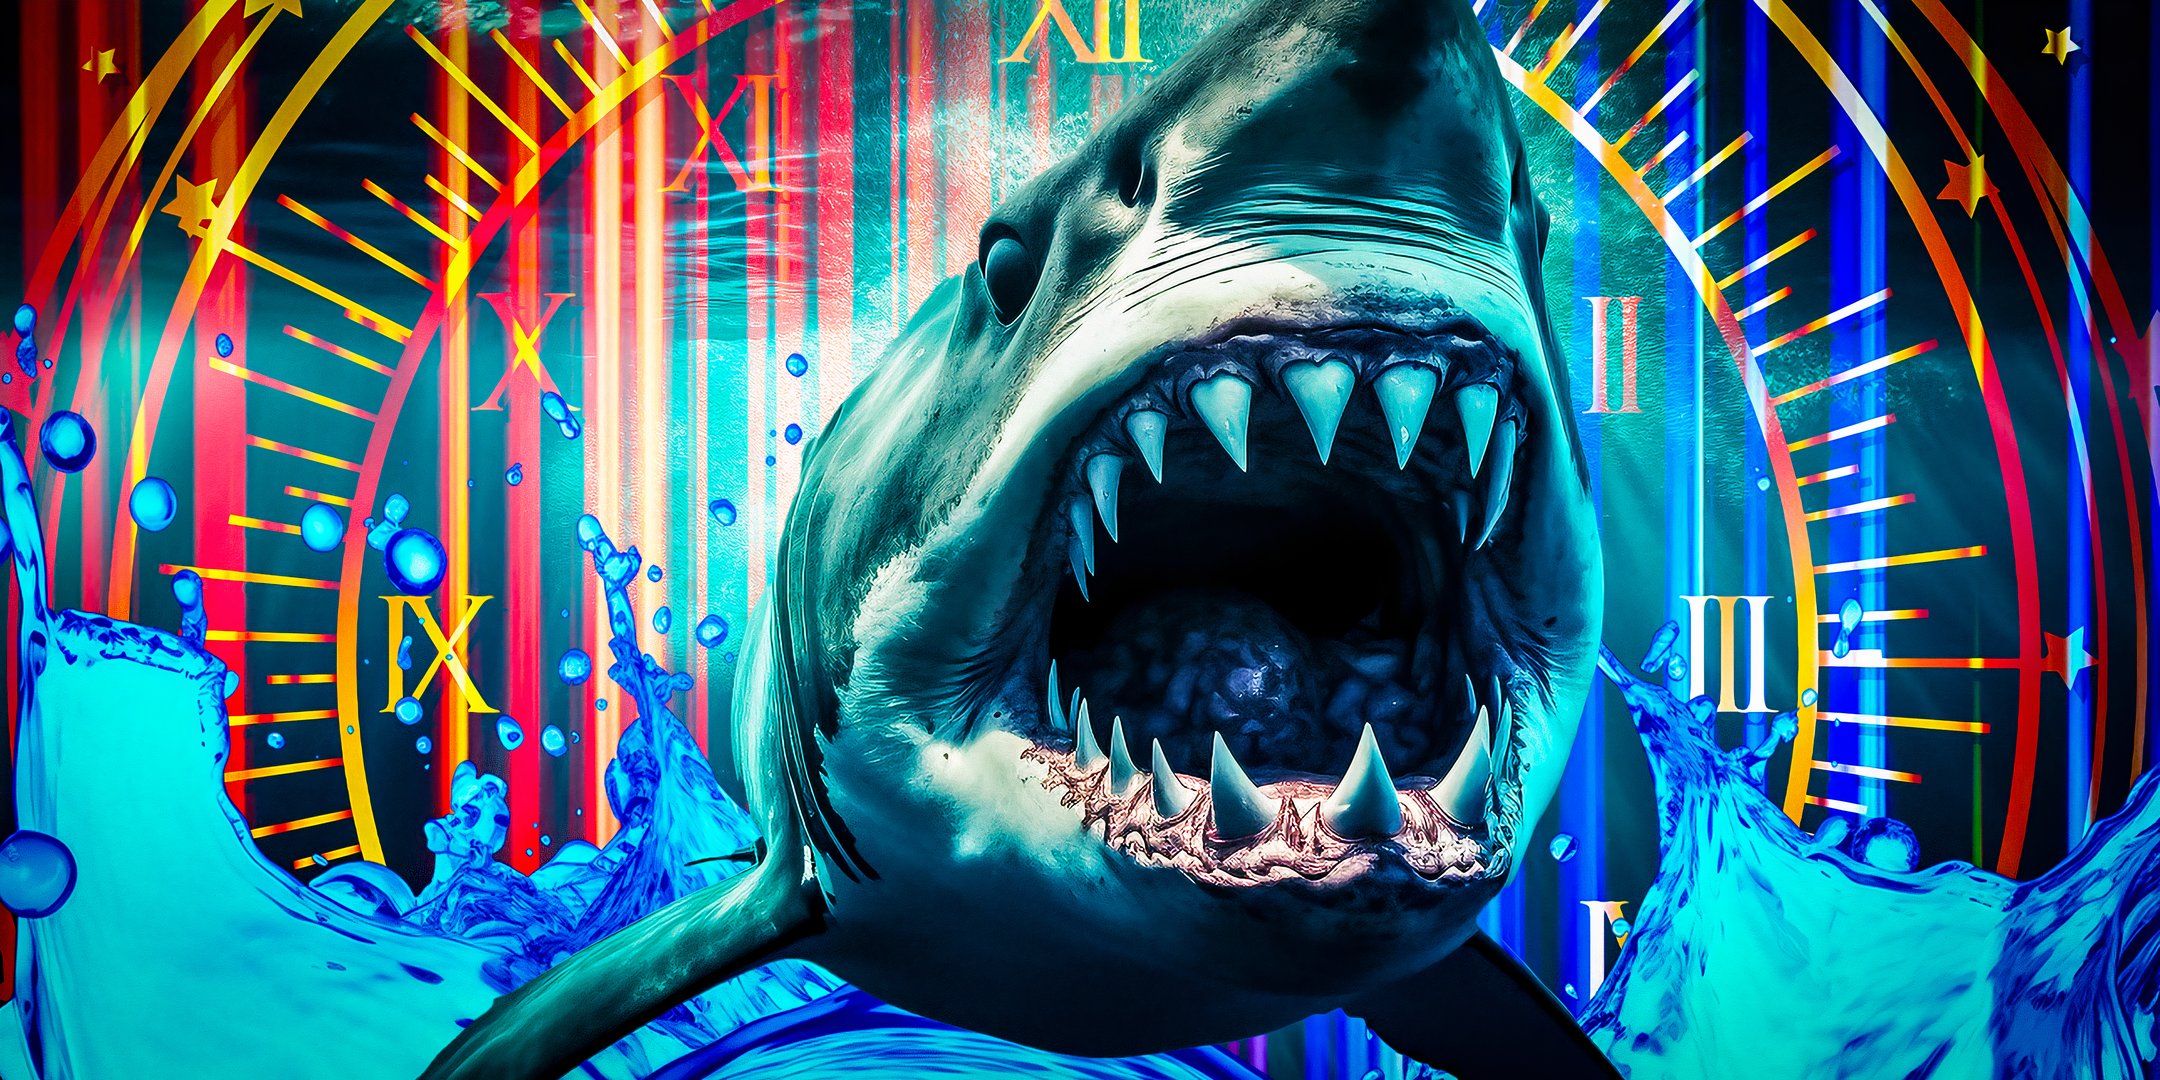 A great white shark with its mouth open in front of a picture of a clock face